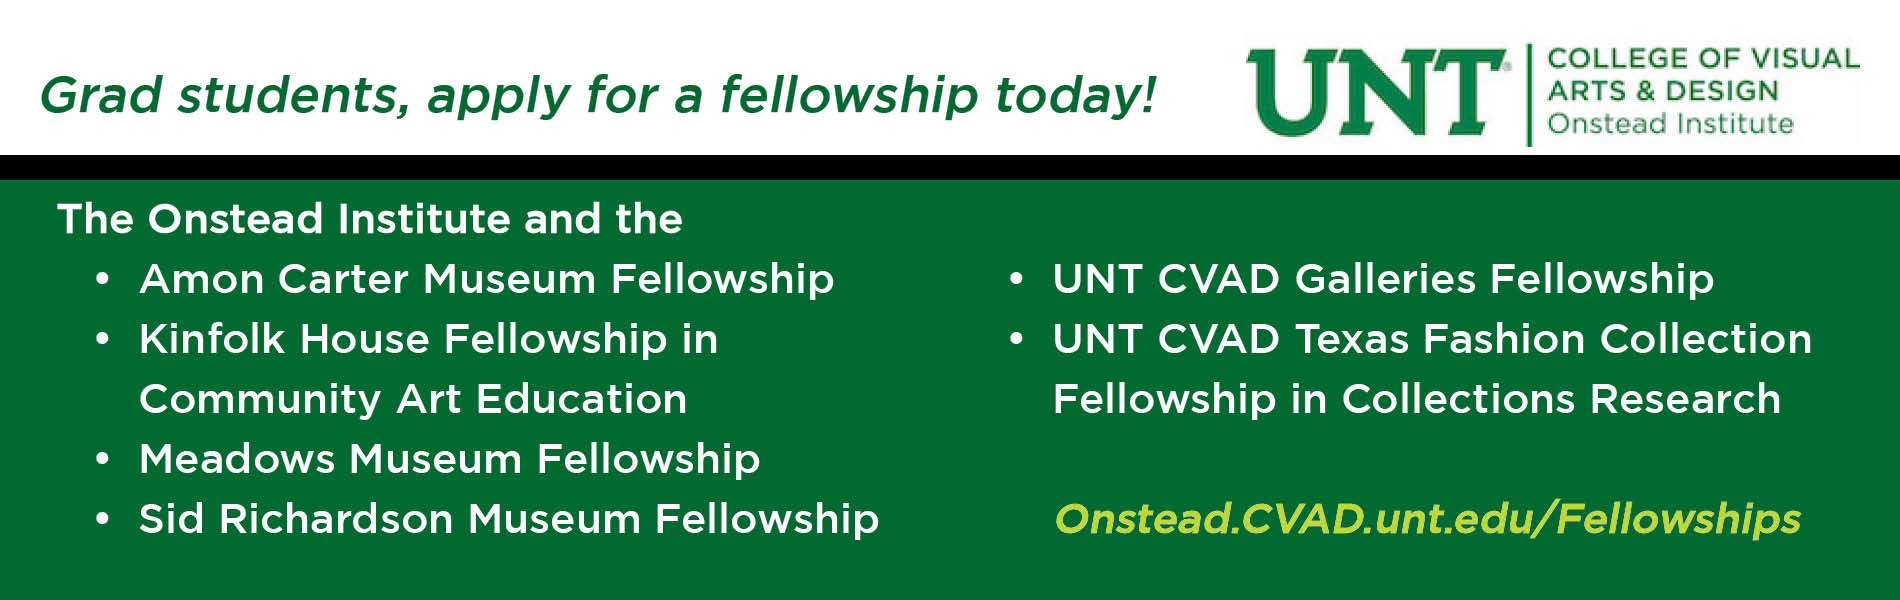 Grad students, apply for a fellowship today!